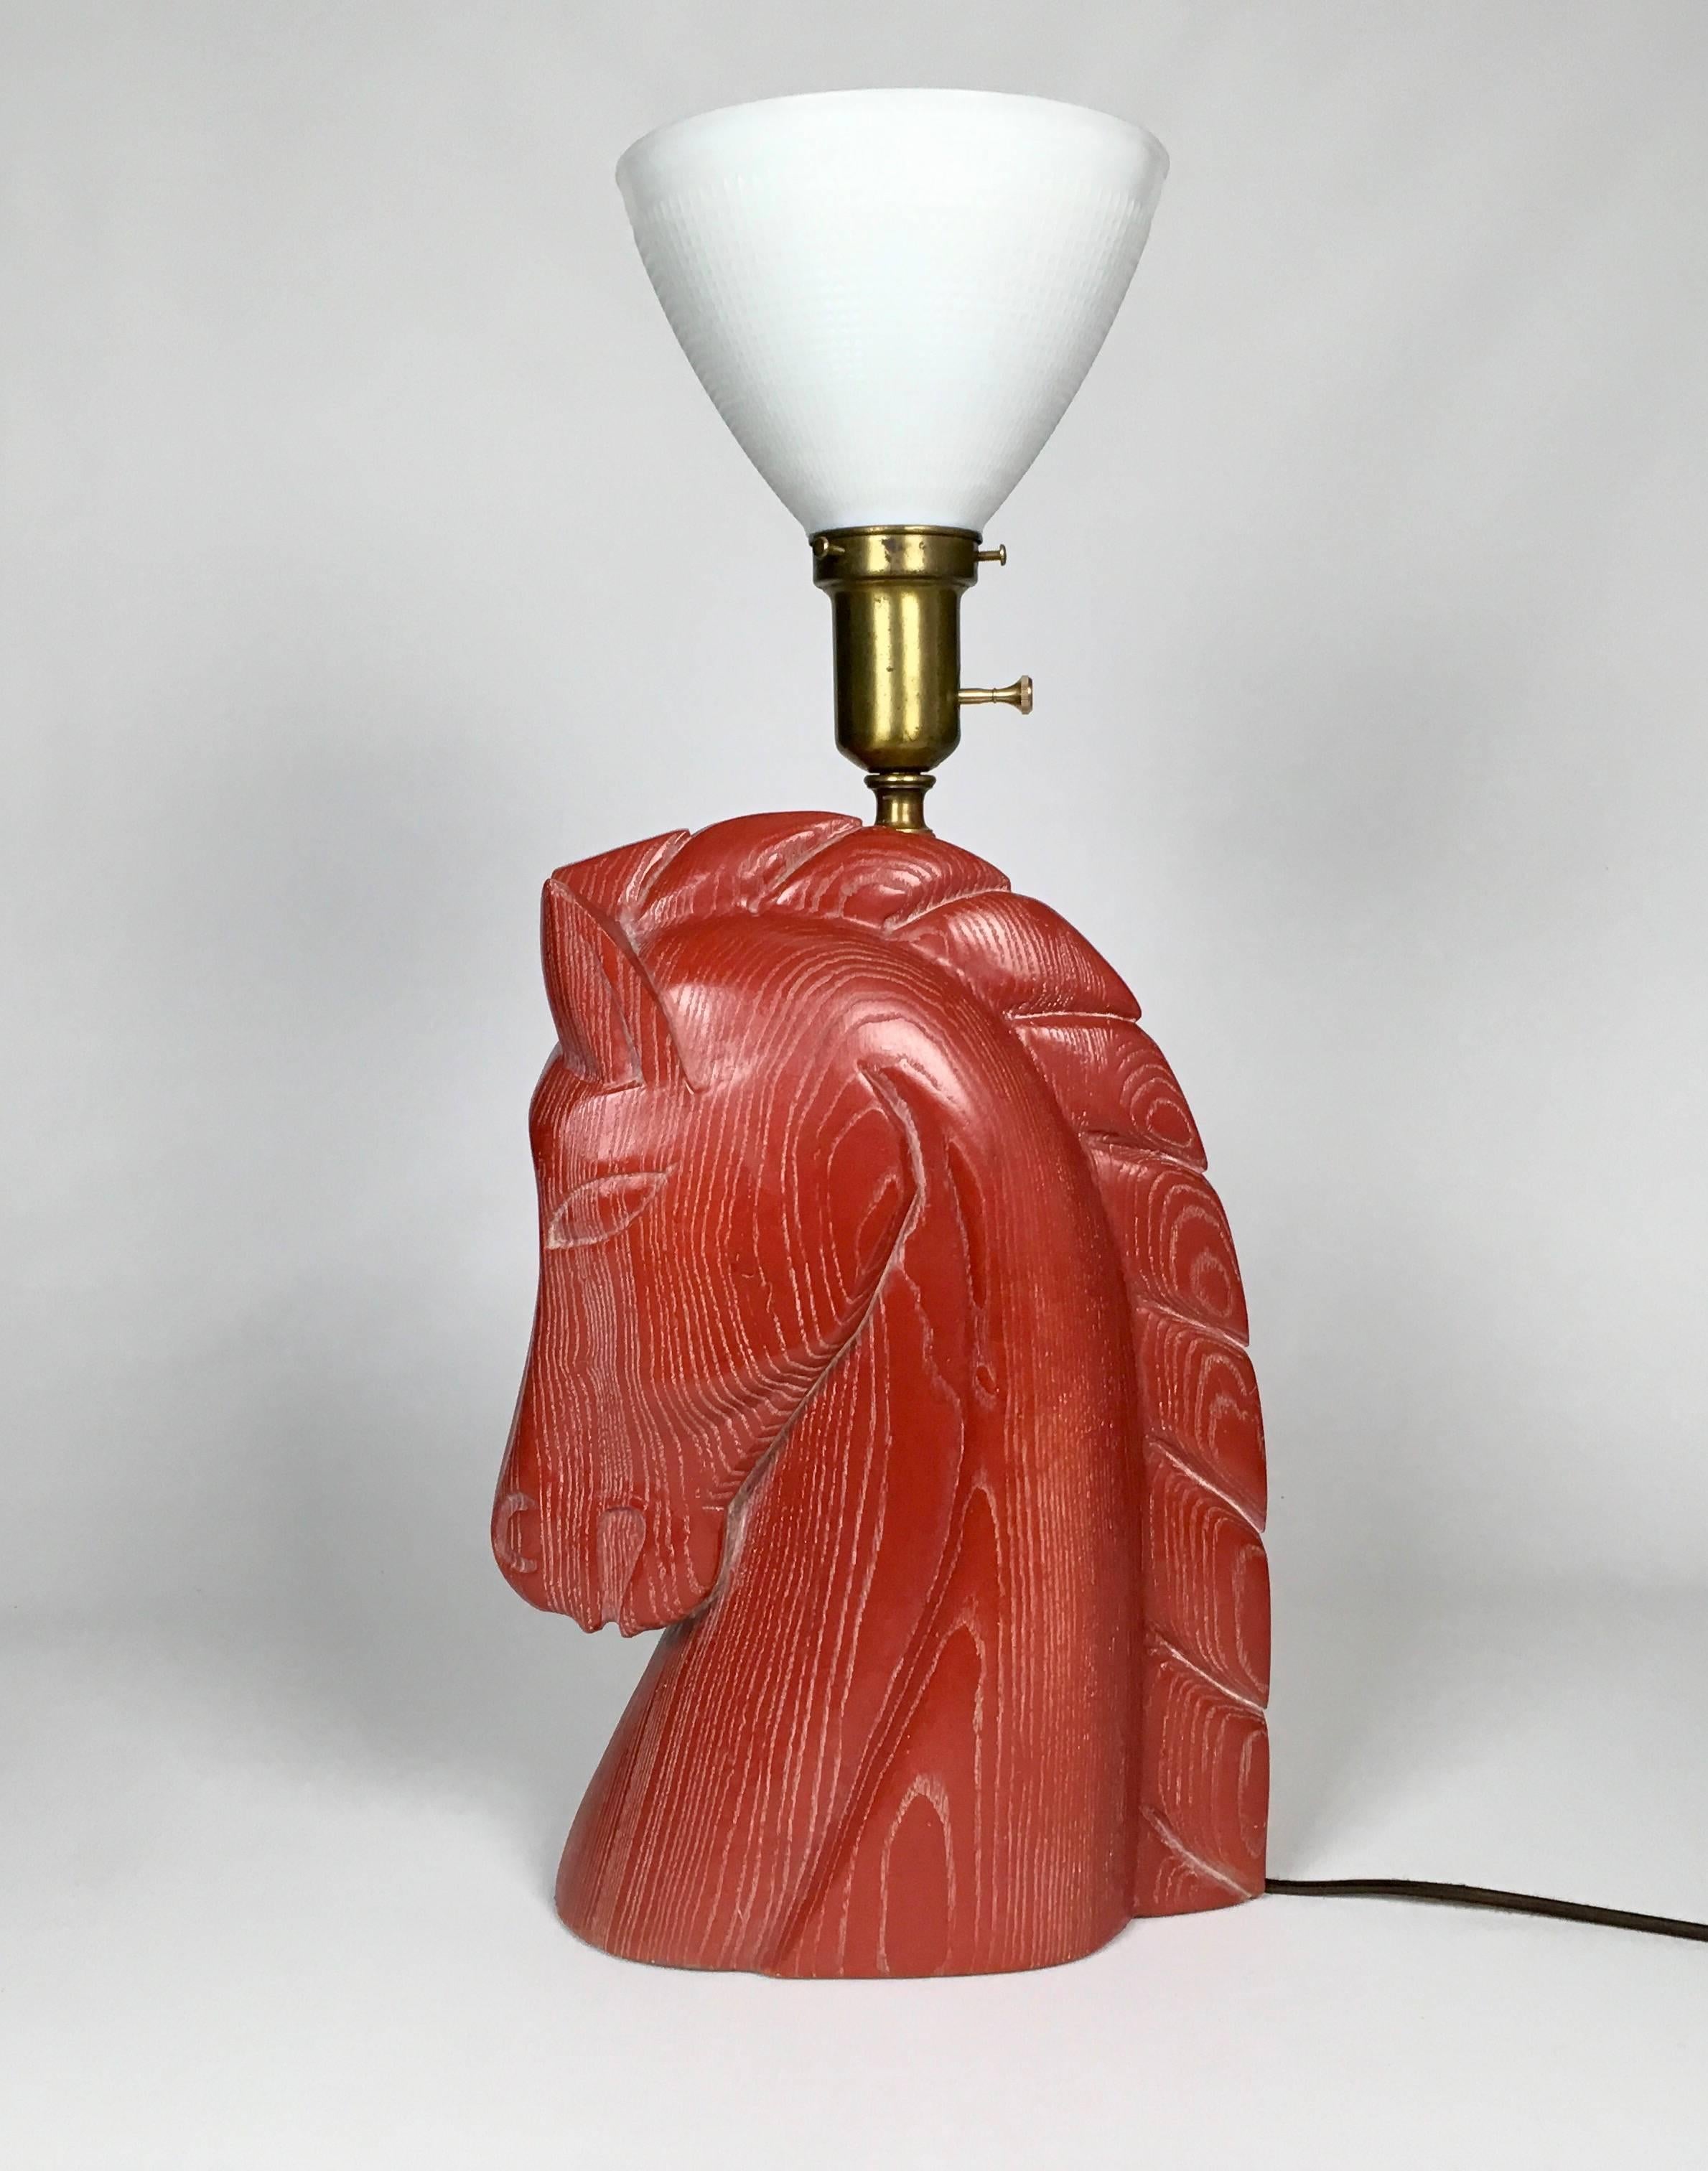 A Billy Haines Mid-Century red limed oak horse head lamp in excellent condition, circa 1950. Rewired, new wire and switch. Original red limed oak with original shade and finial. Measures: Shade 20 1/2